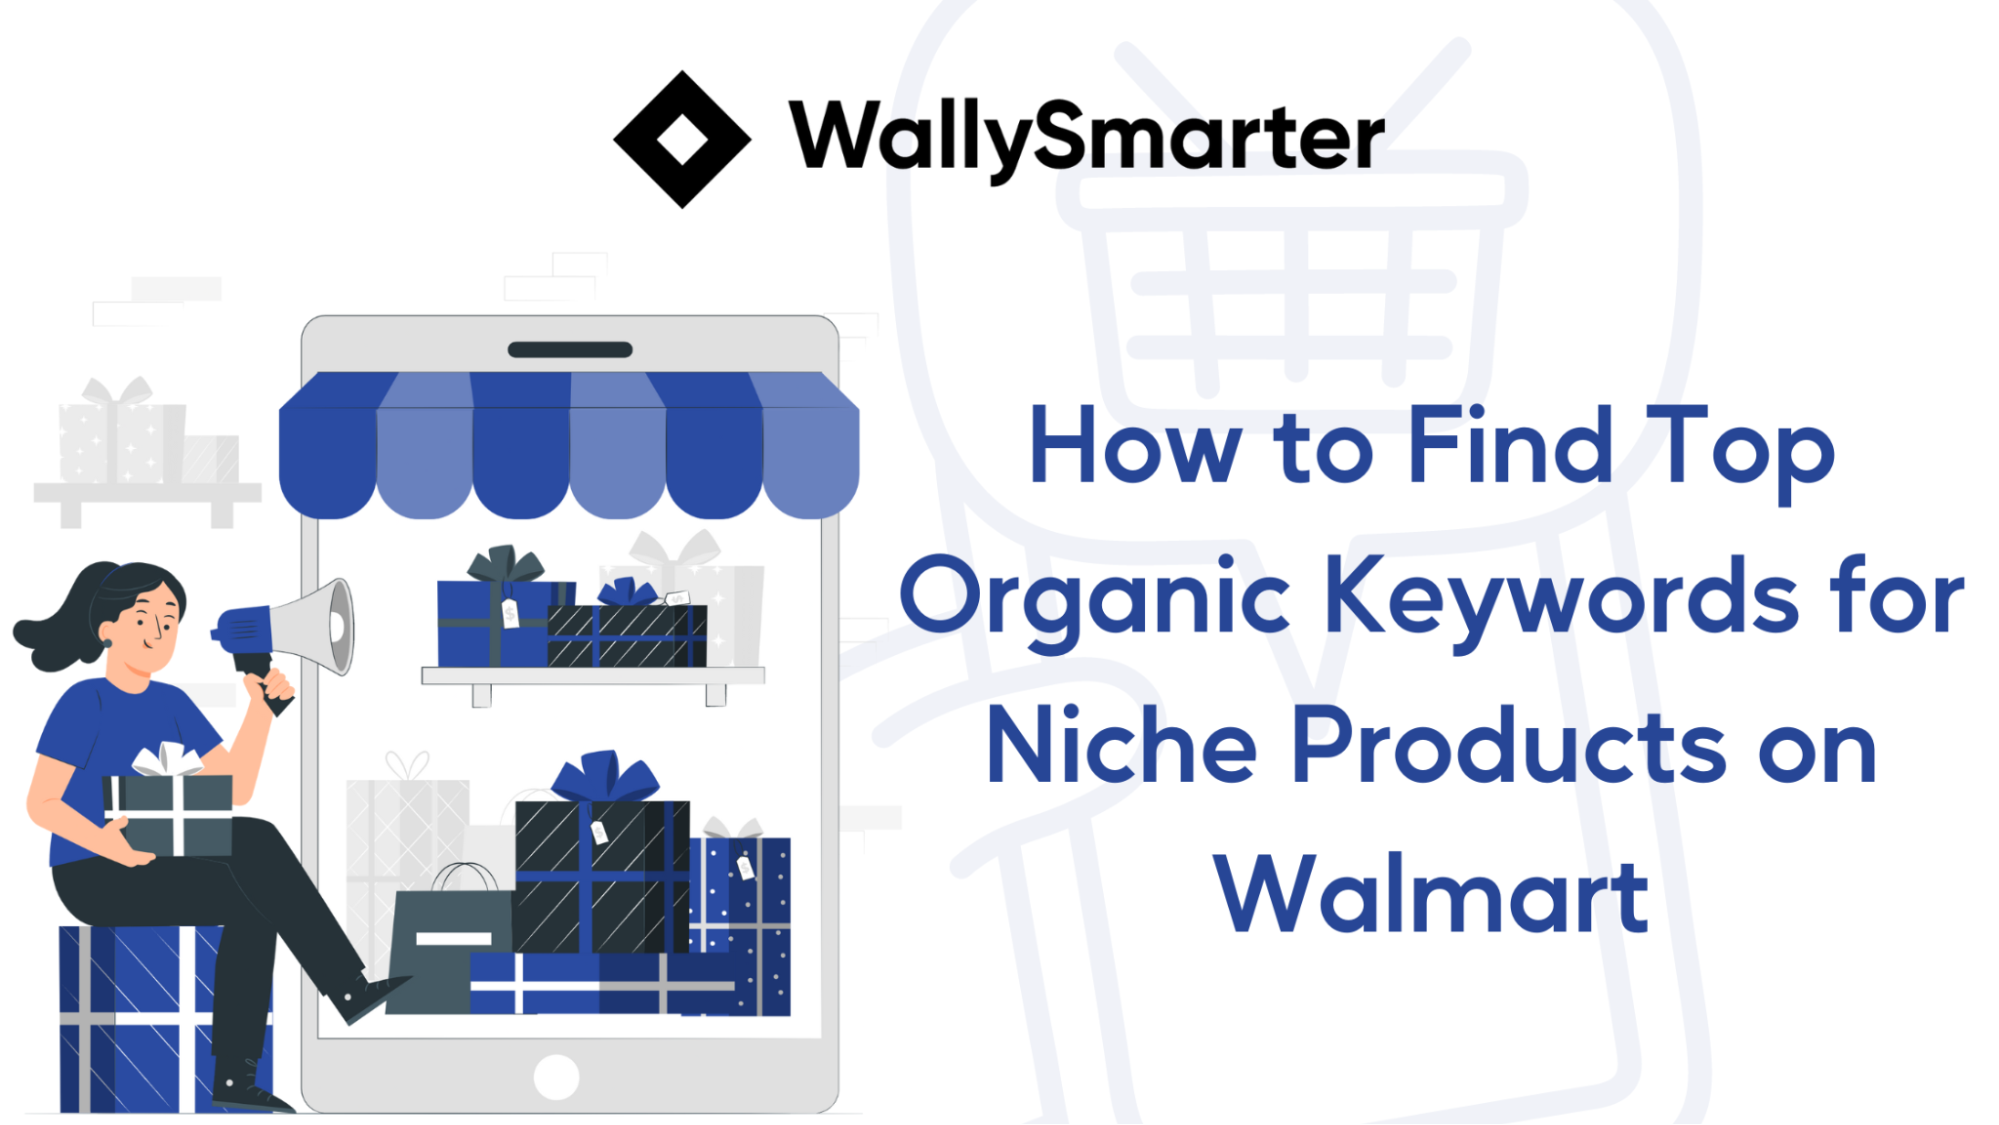 How to Find Top Organic Keywords for Niche Products on Walmart.com